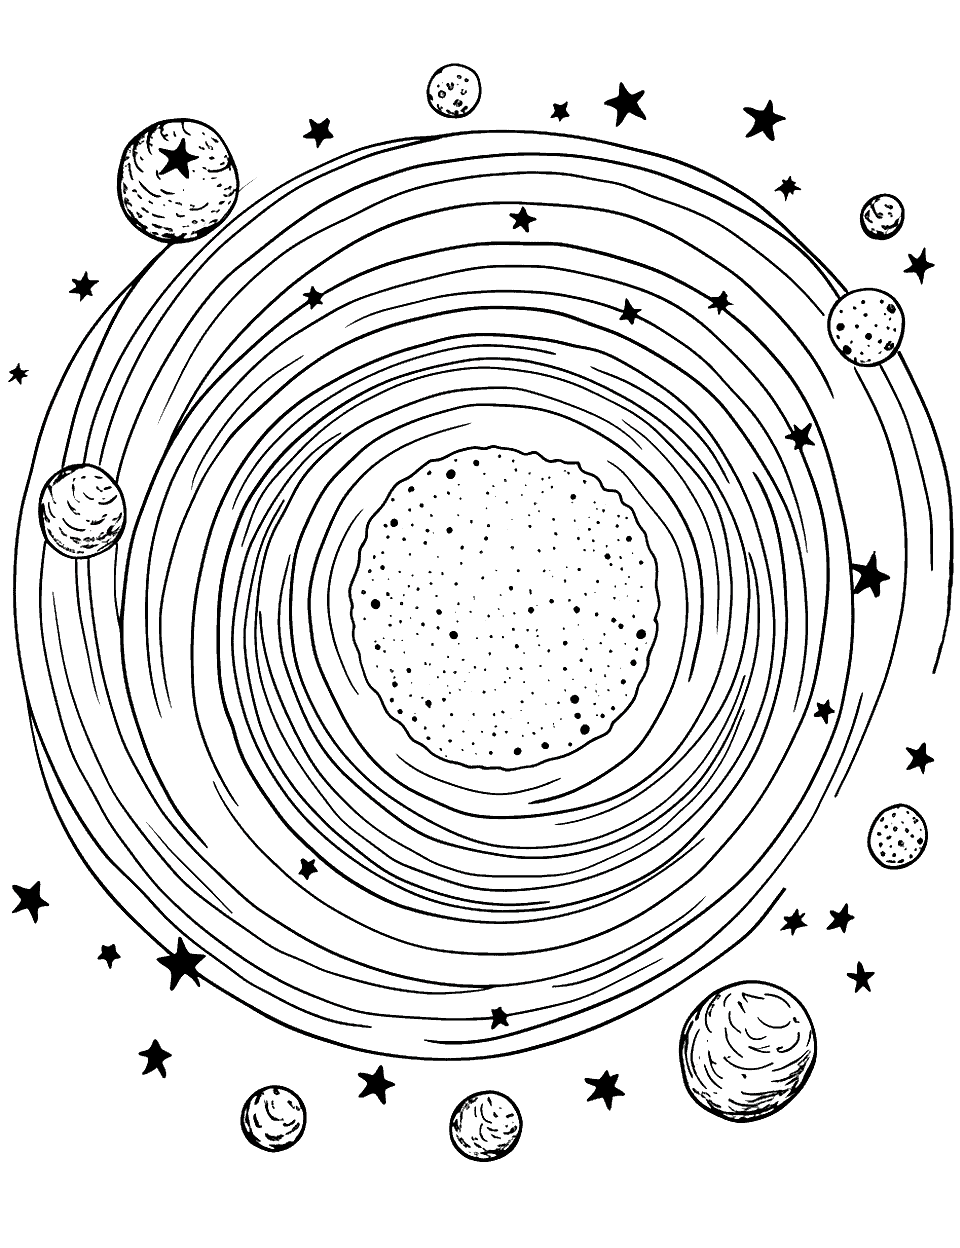 Swirling Galaxy Solar System Coloring Page - A spiral galaxy with swirling arms and a bright center.